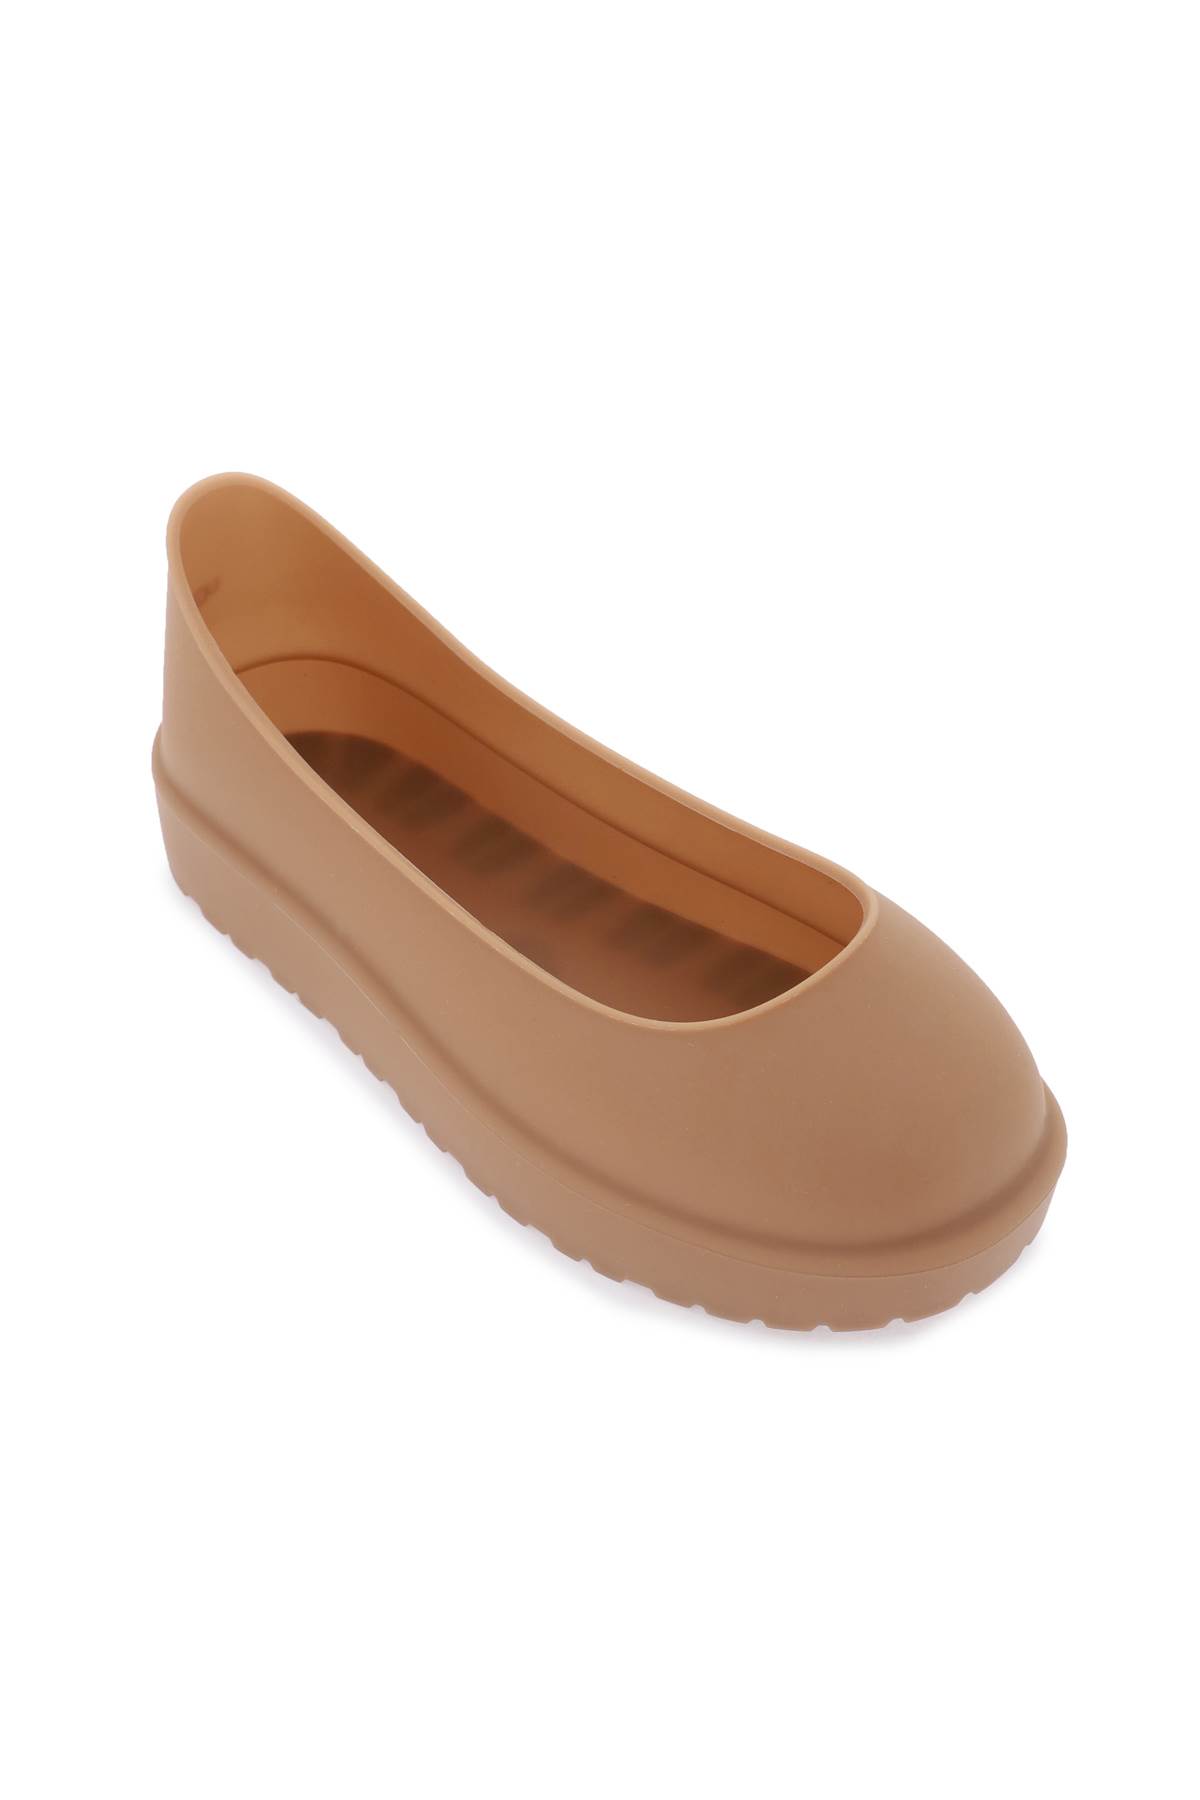 Shop Ugg Guard Shoe Protection In Chestnut (brown)